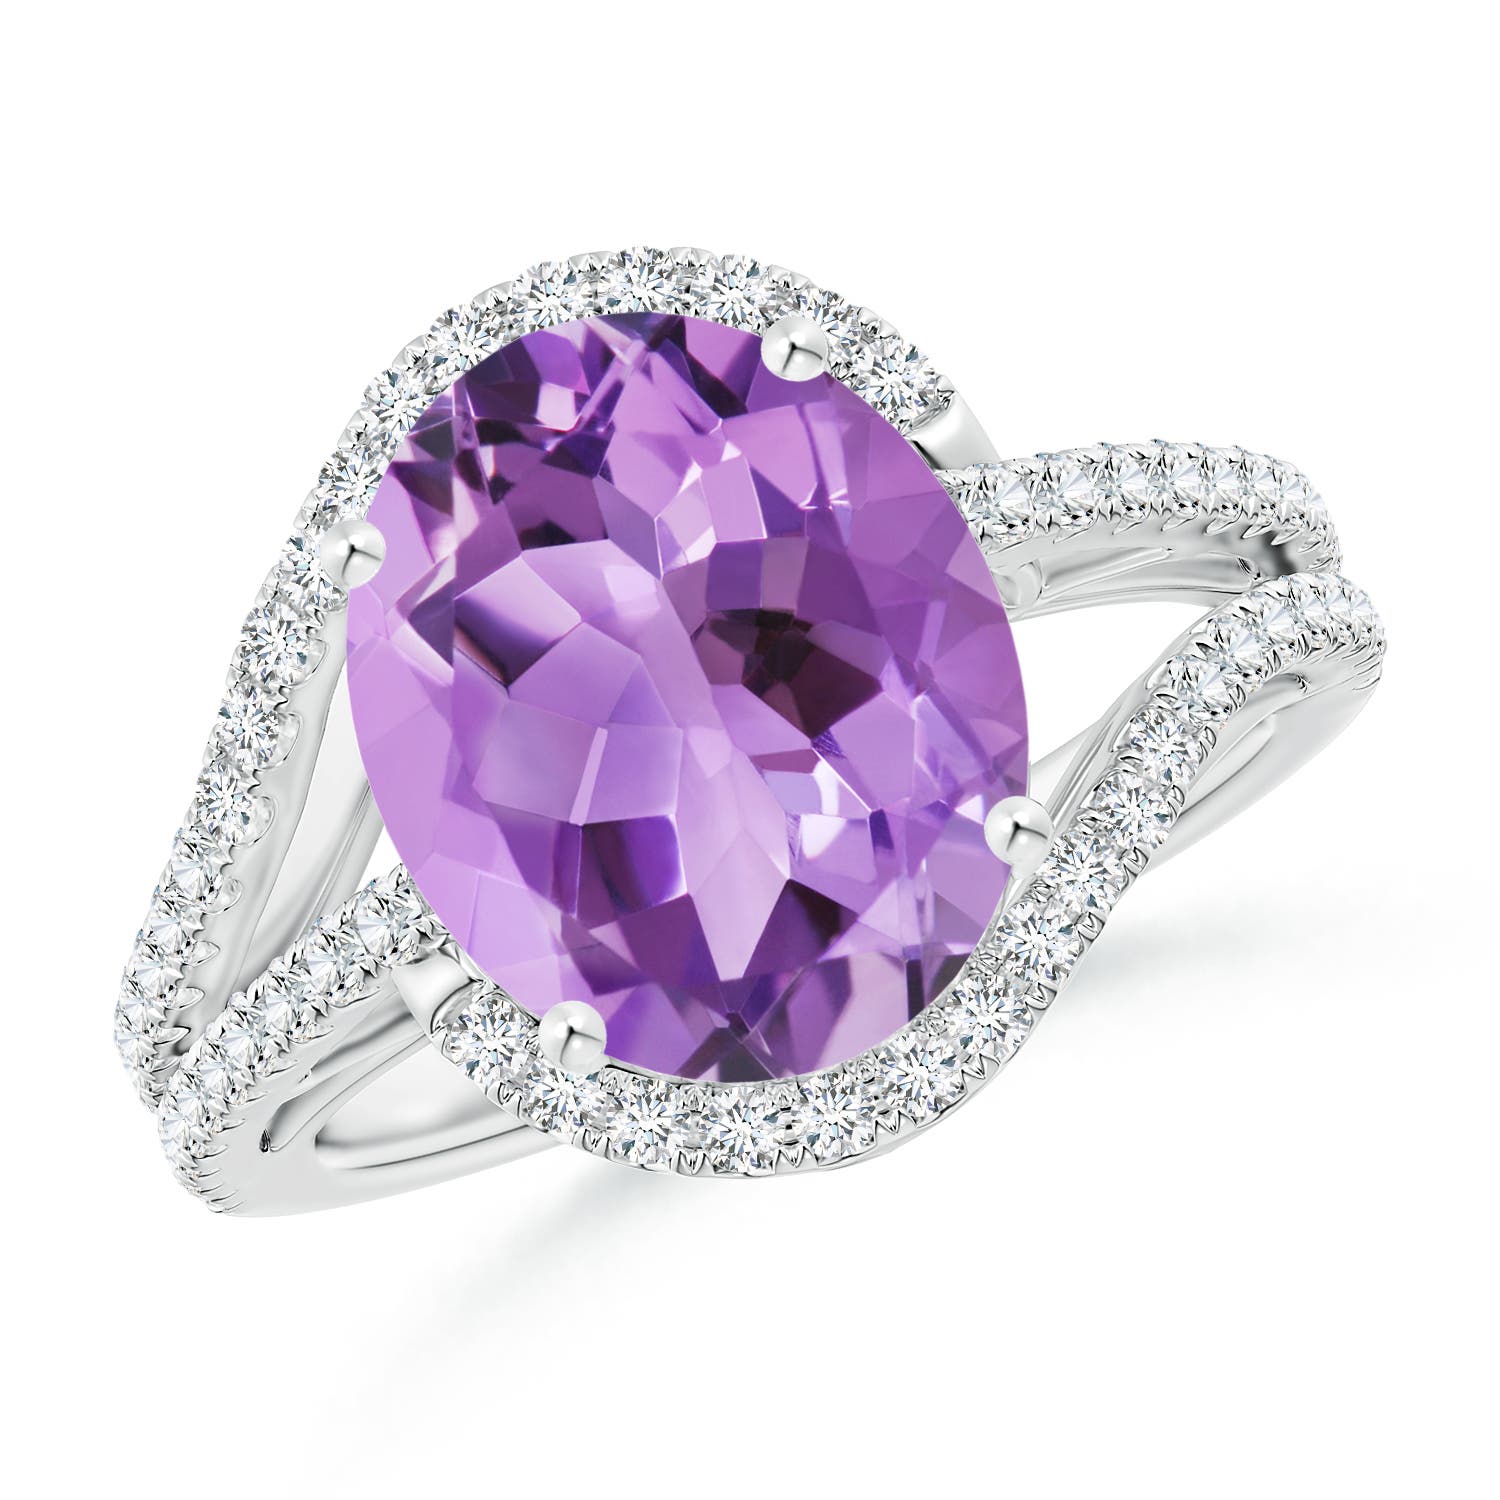 A - Amethyst / 4.92 CT / 14 KT White Gold